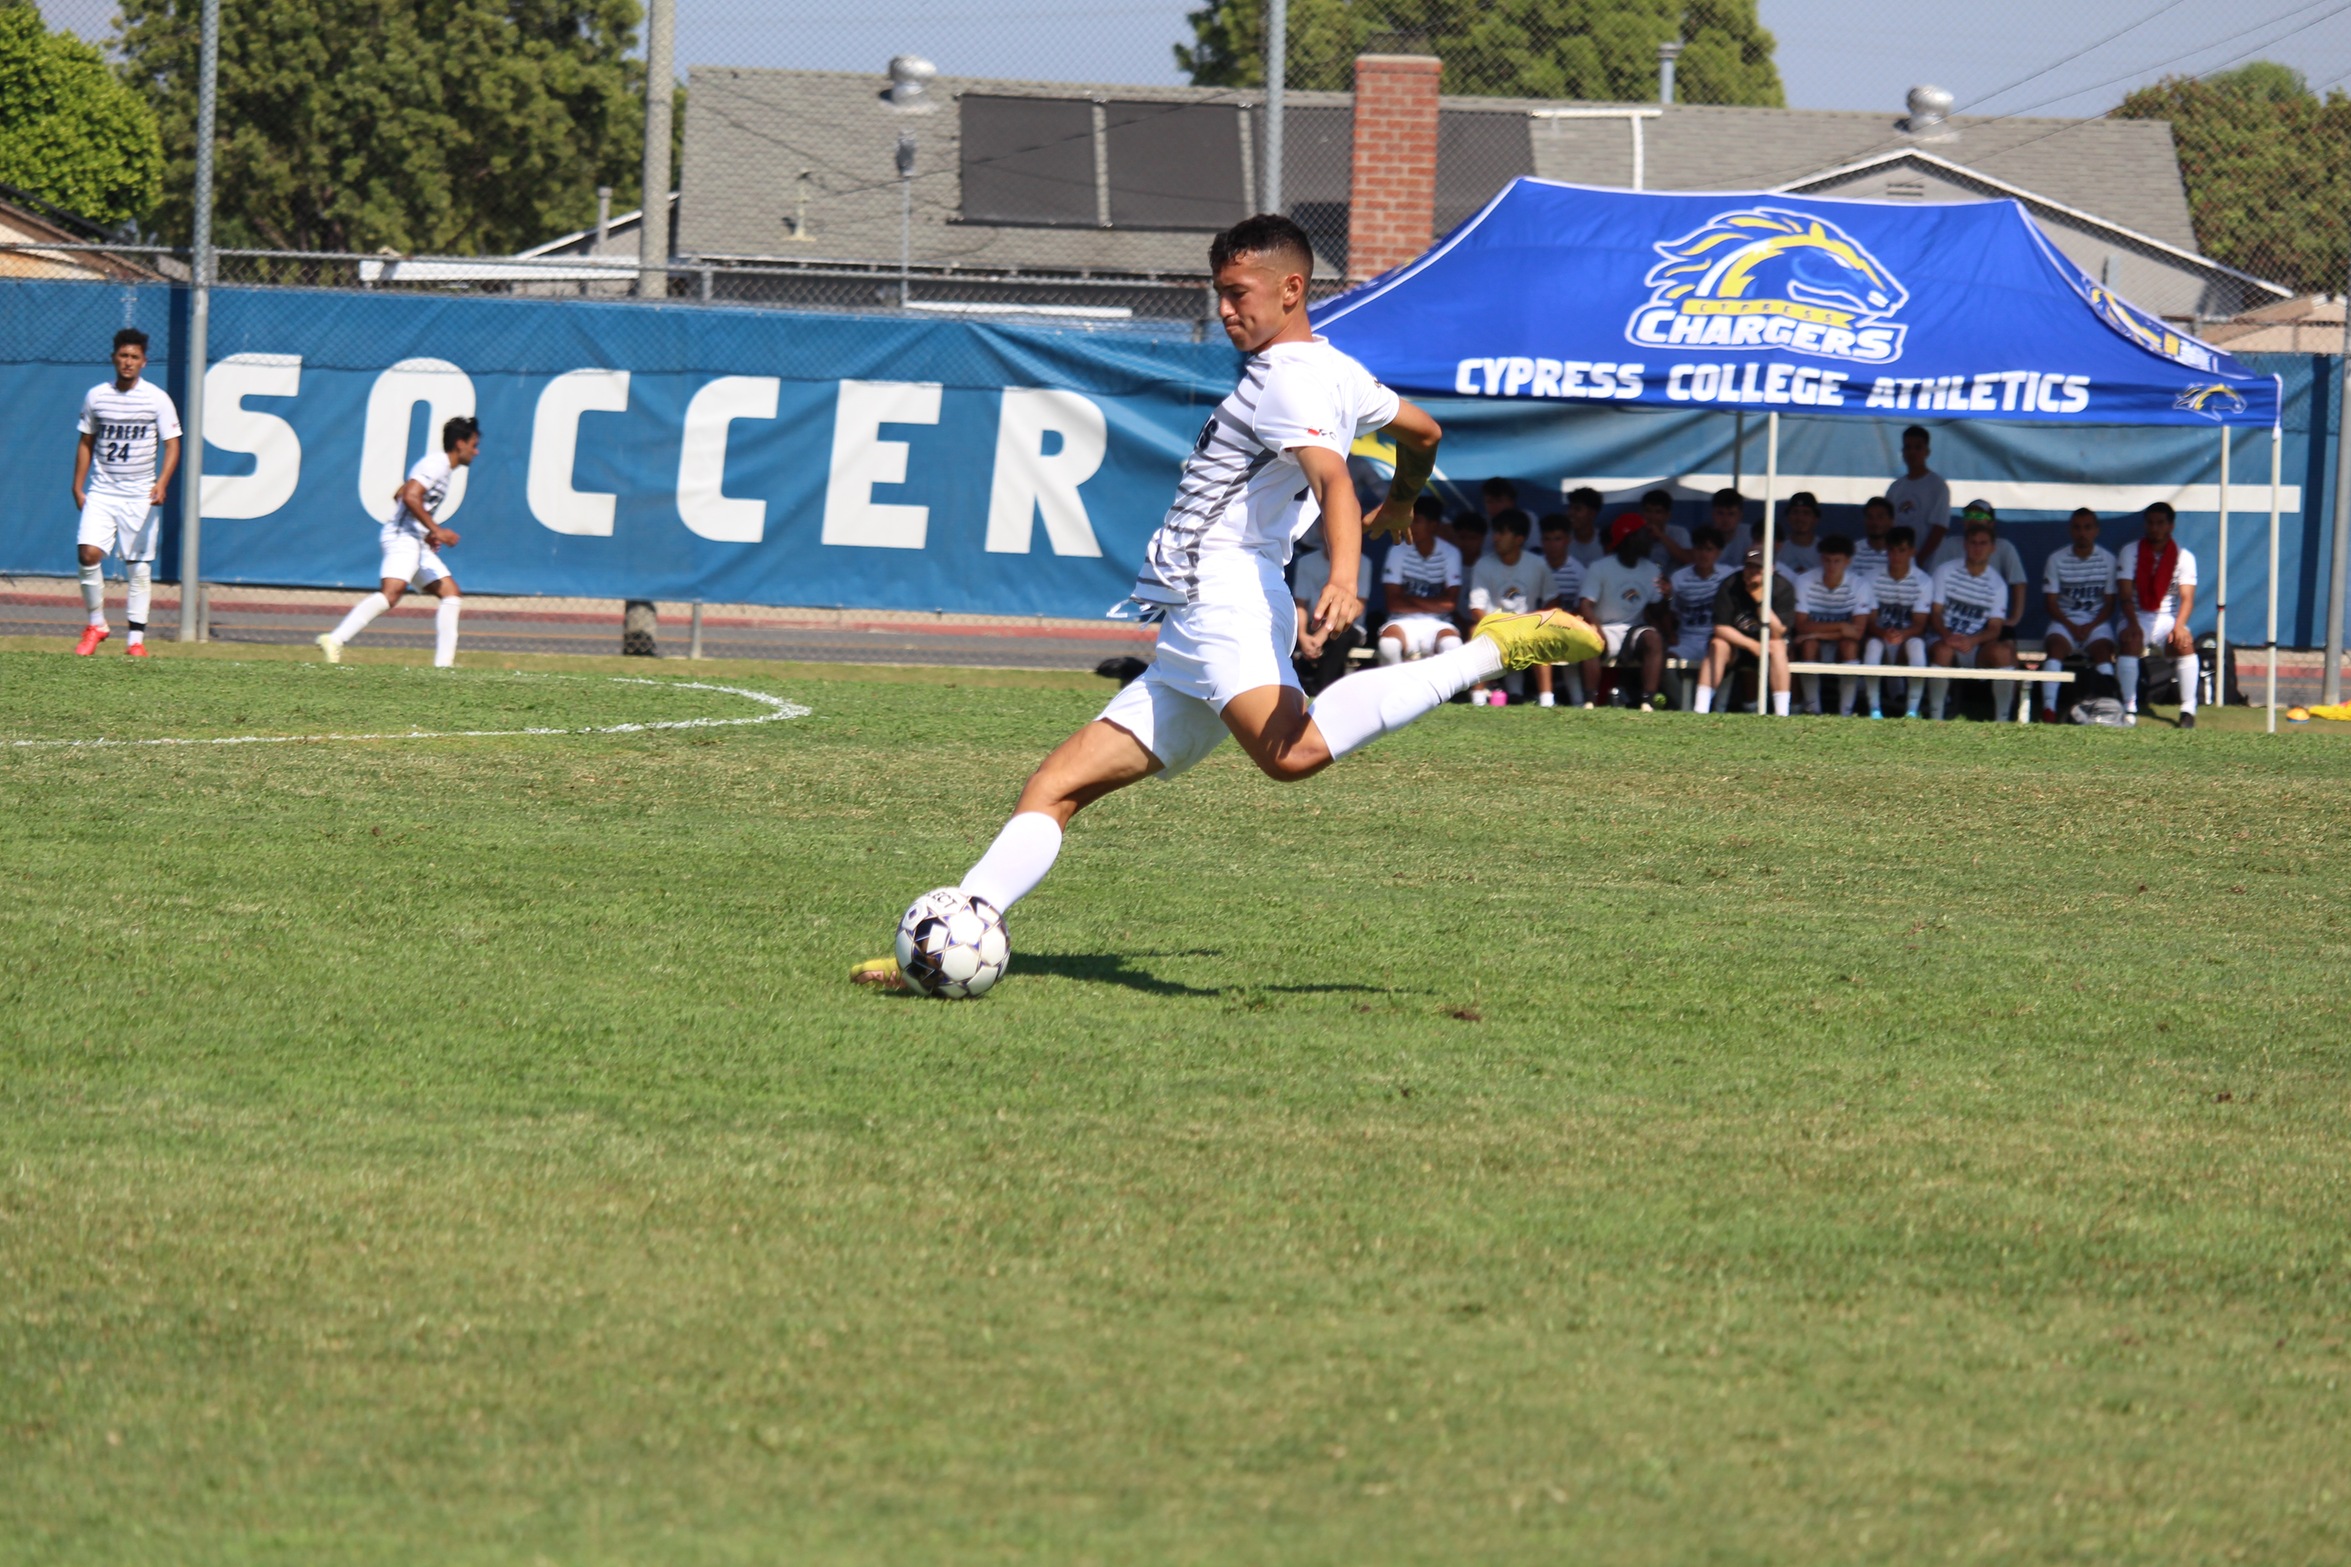 Chargers Draw 1-1 with Palomar in Season Opener